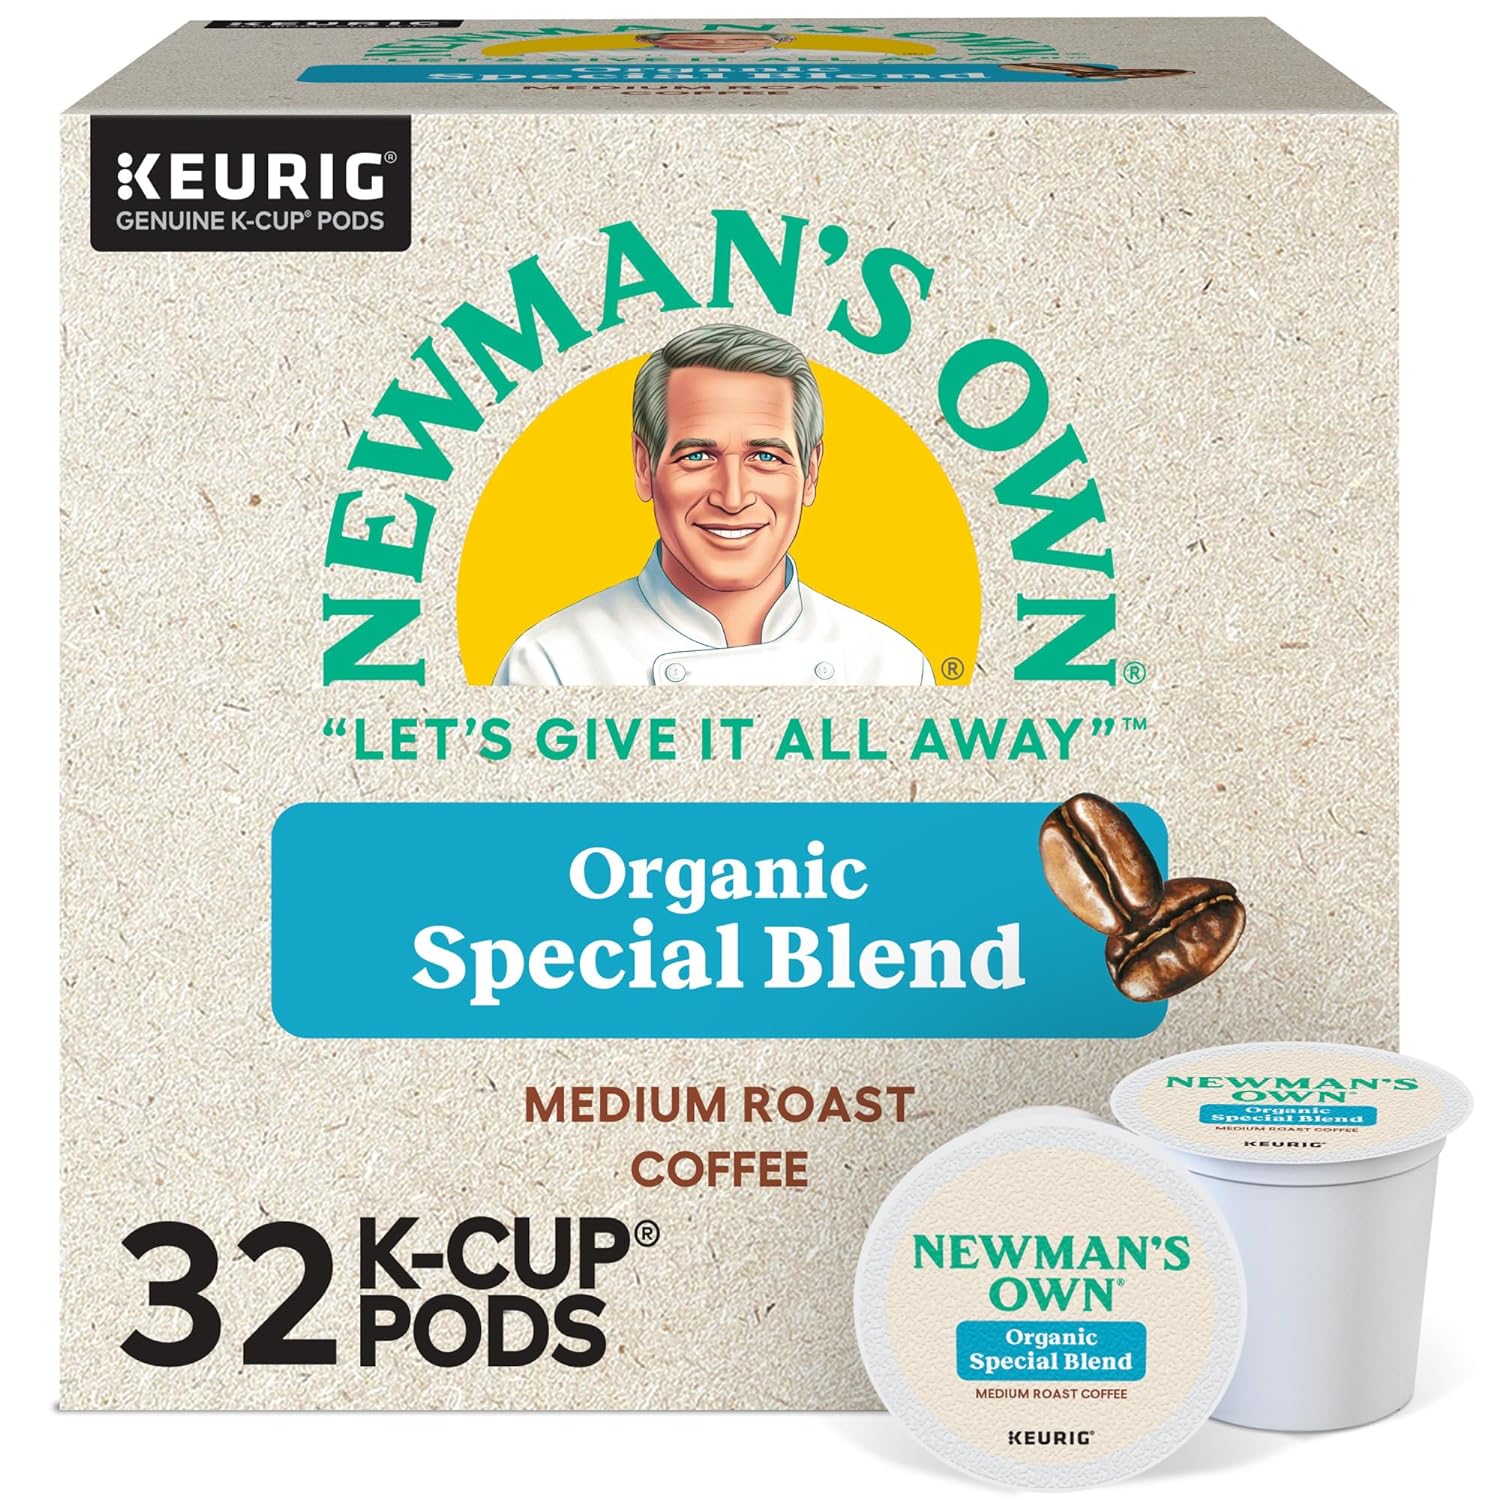 This is the only coffee I drink. It is organic and has a nice smooth taste. However, it may not be for those who love super dark, dark coffee. Good price for K cups.